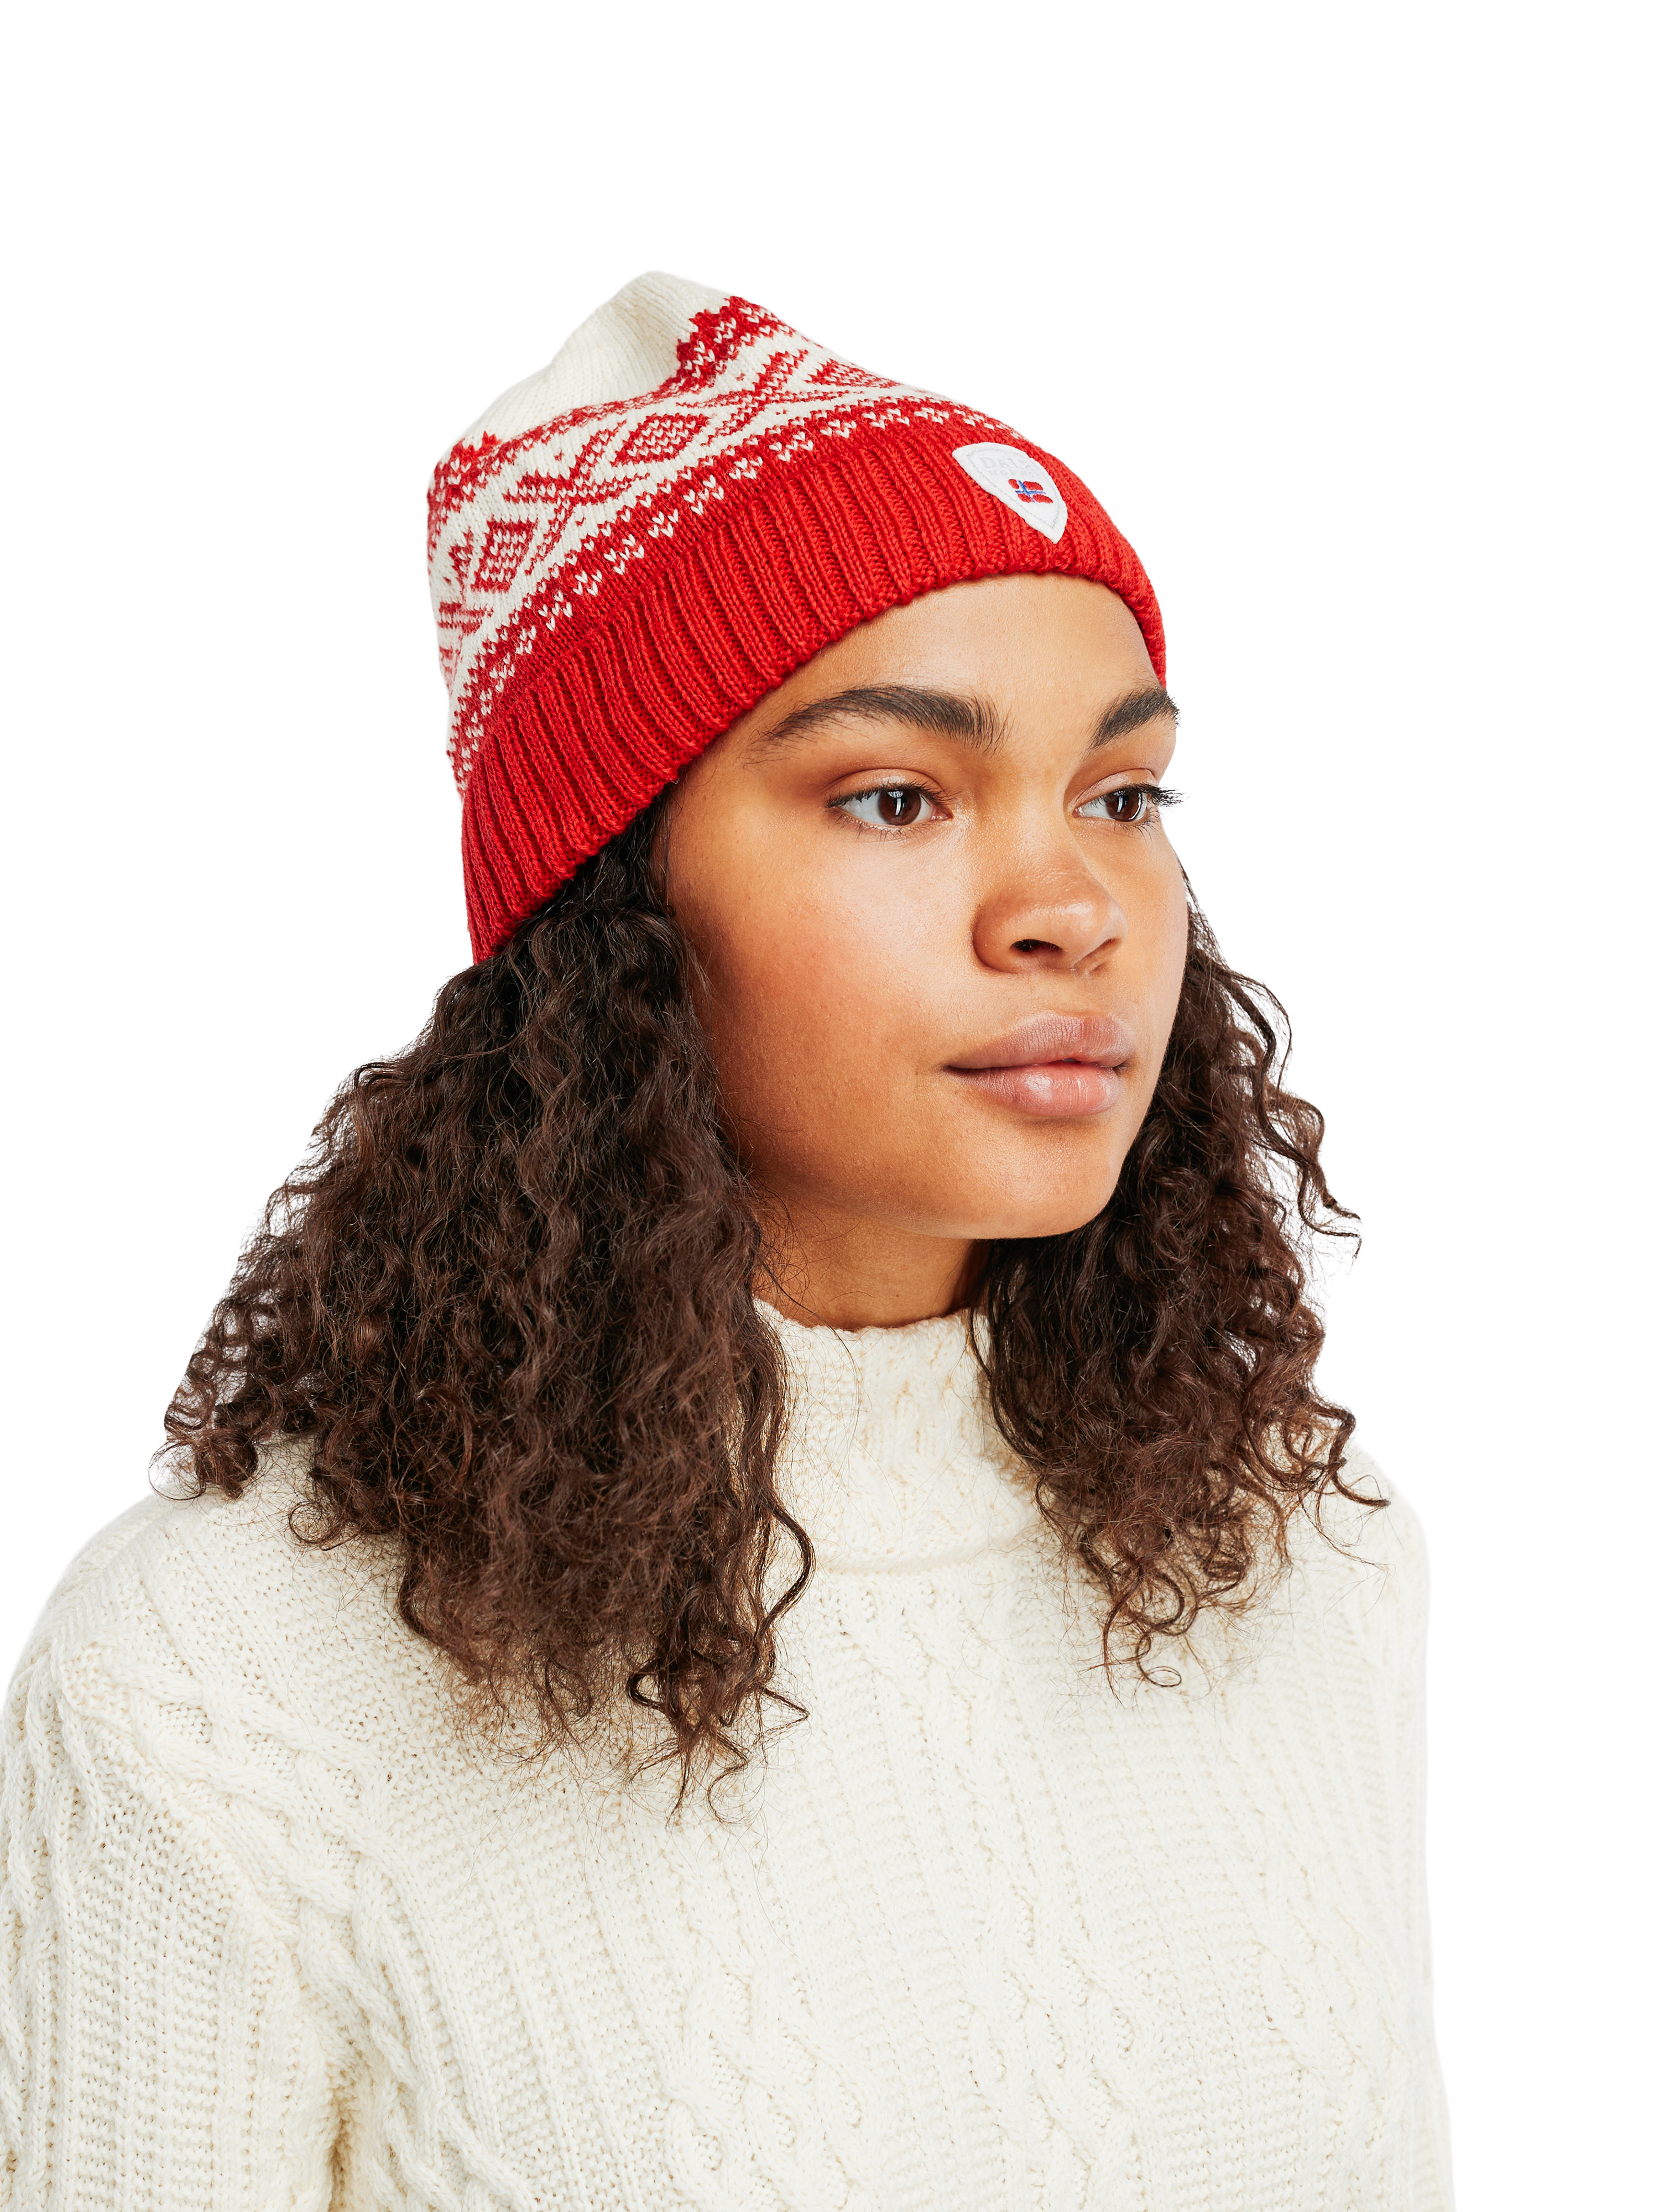 Wool hats for women - Dale of Norway